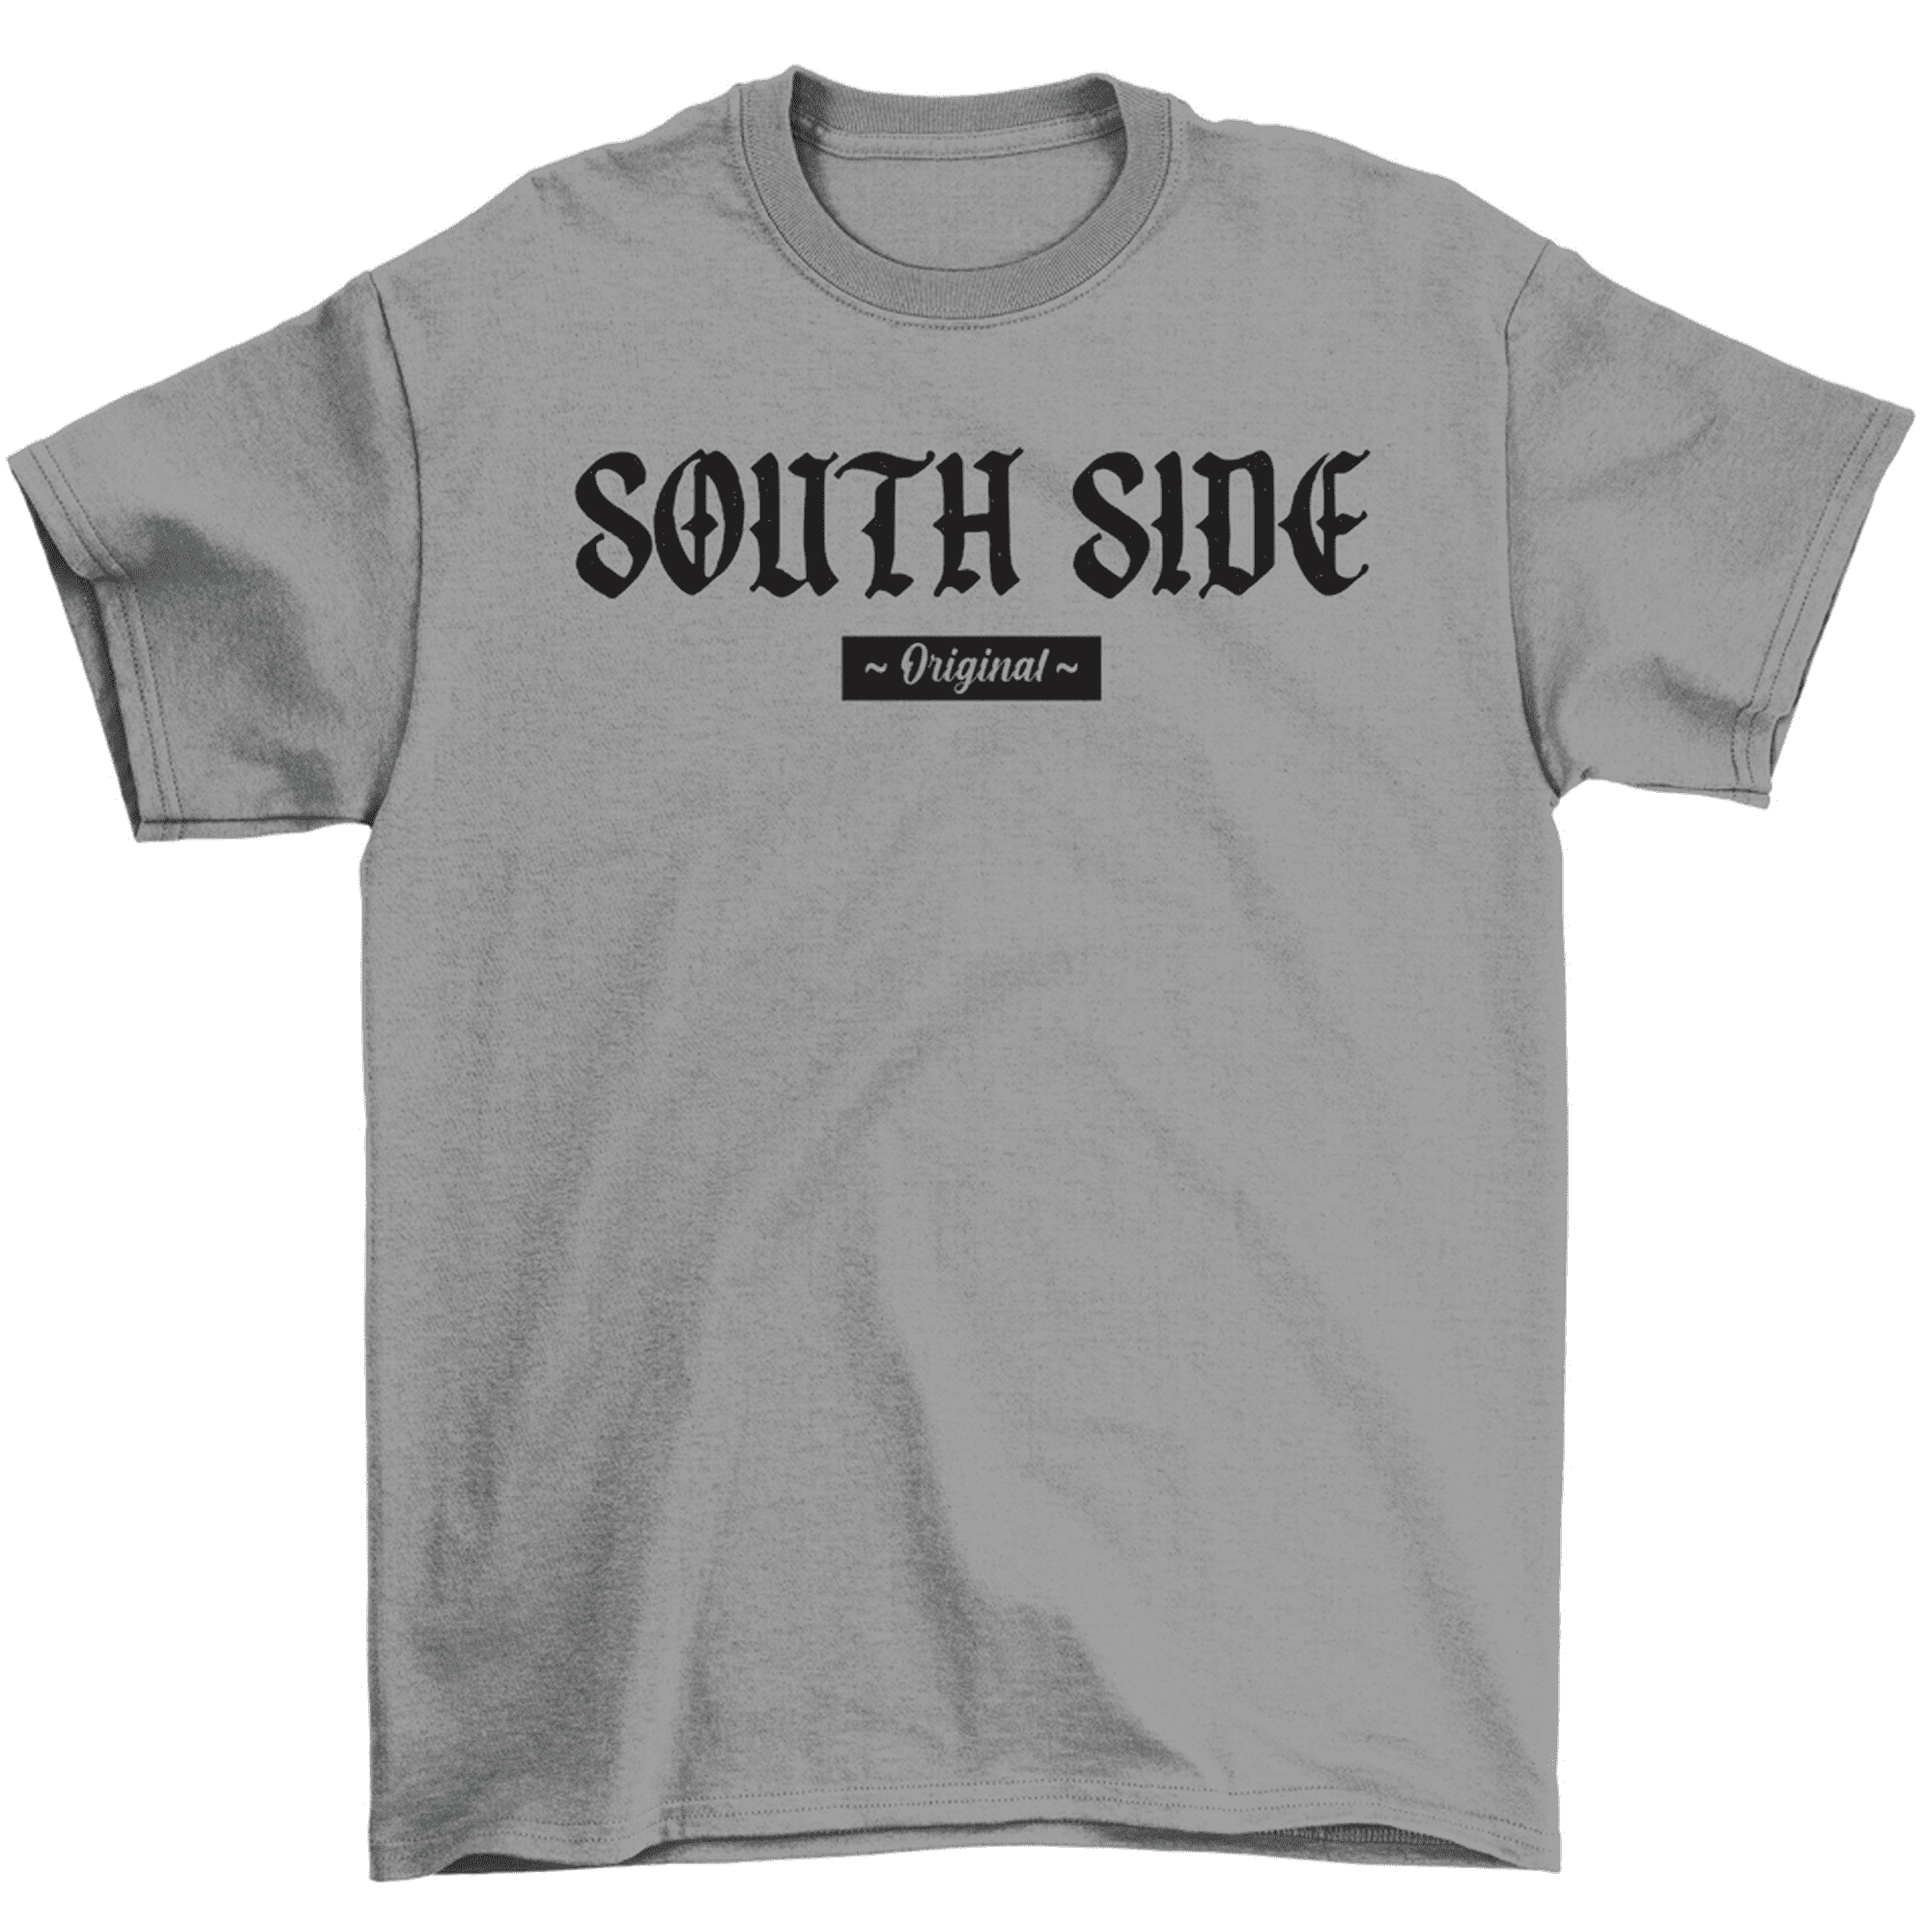 Jax of Hearts South Side Original T-Shirt Southside Chicago Il Vintage Text Tee, Adult Unisex, Size: XL, Gray